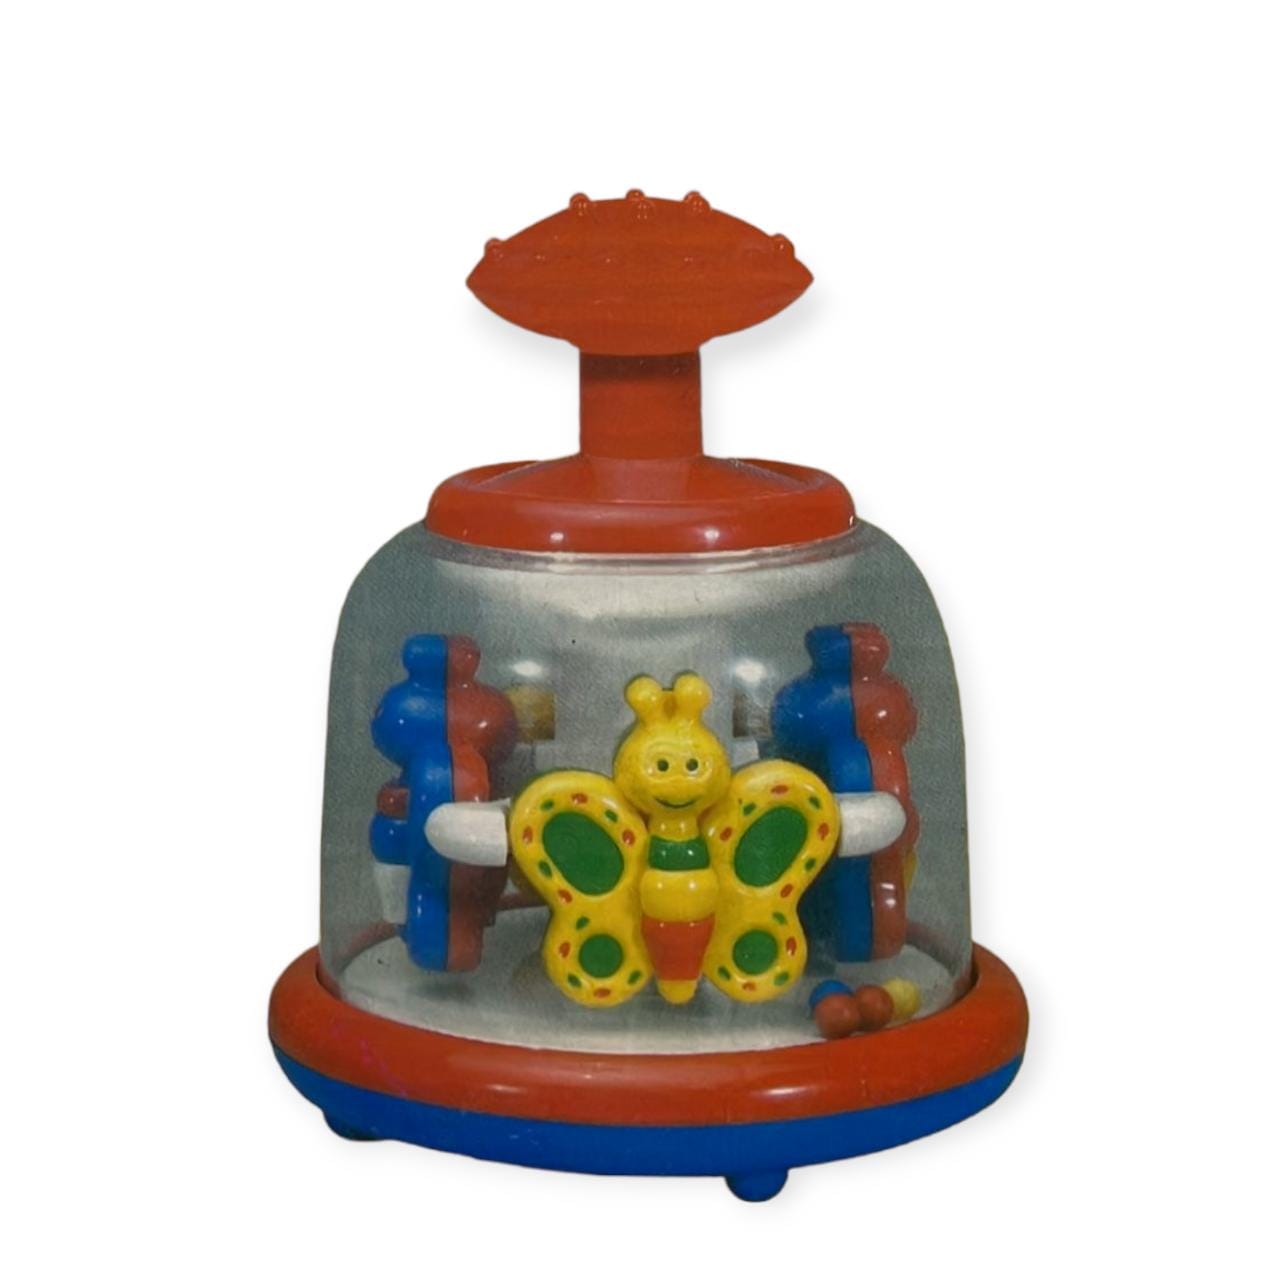 Push and Spin Toy